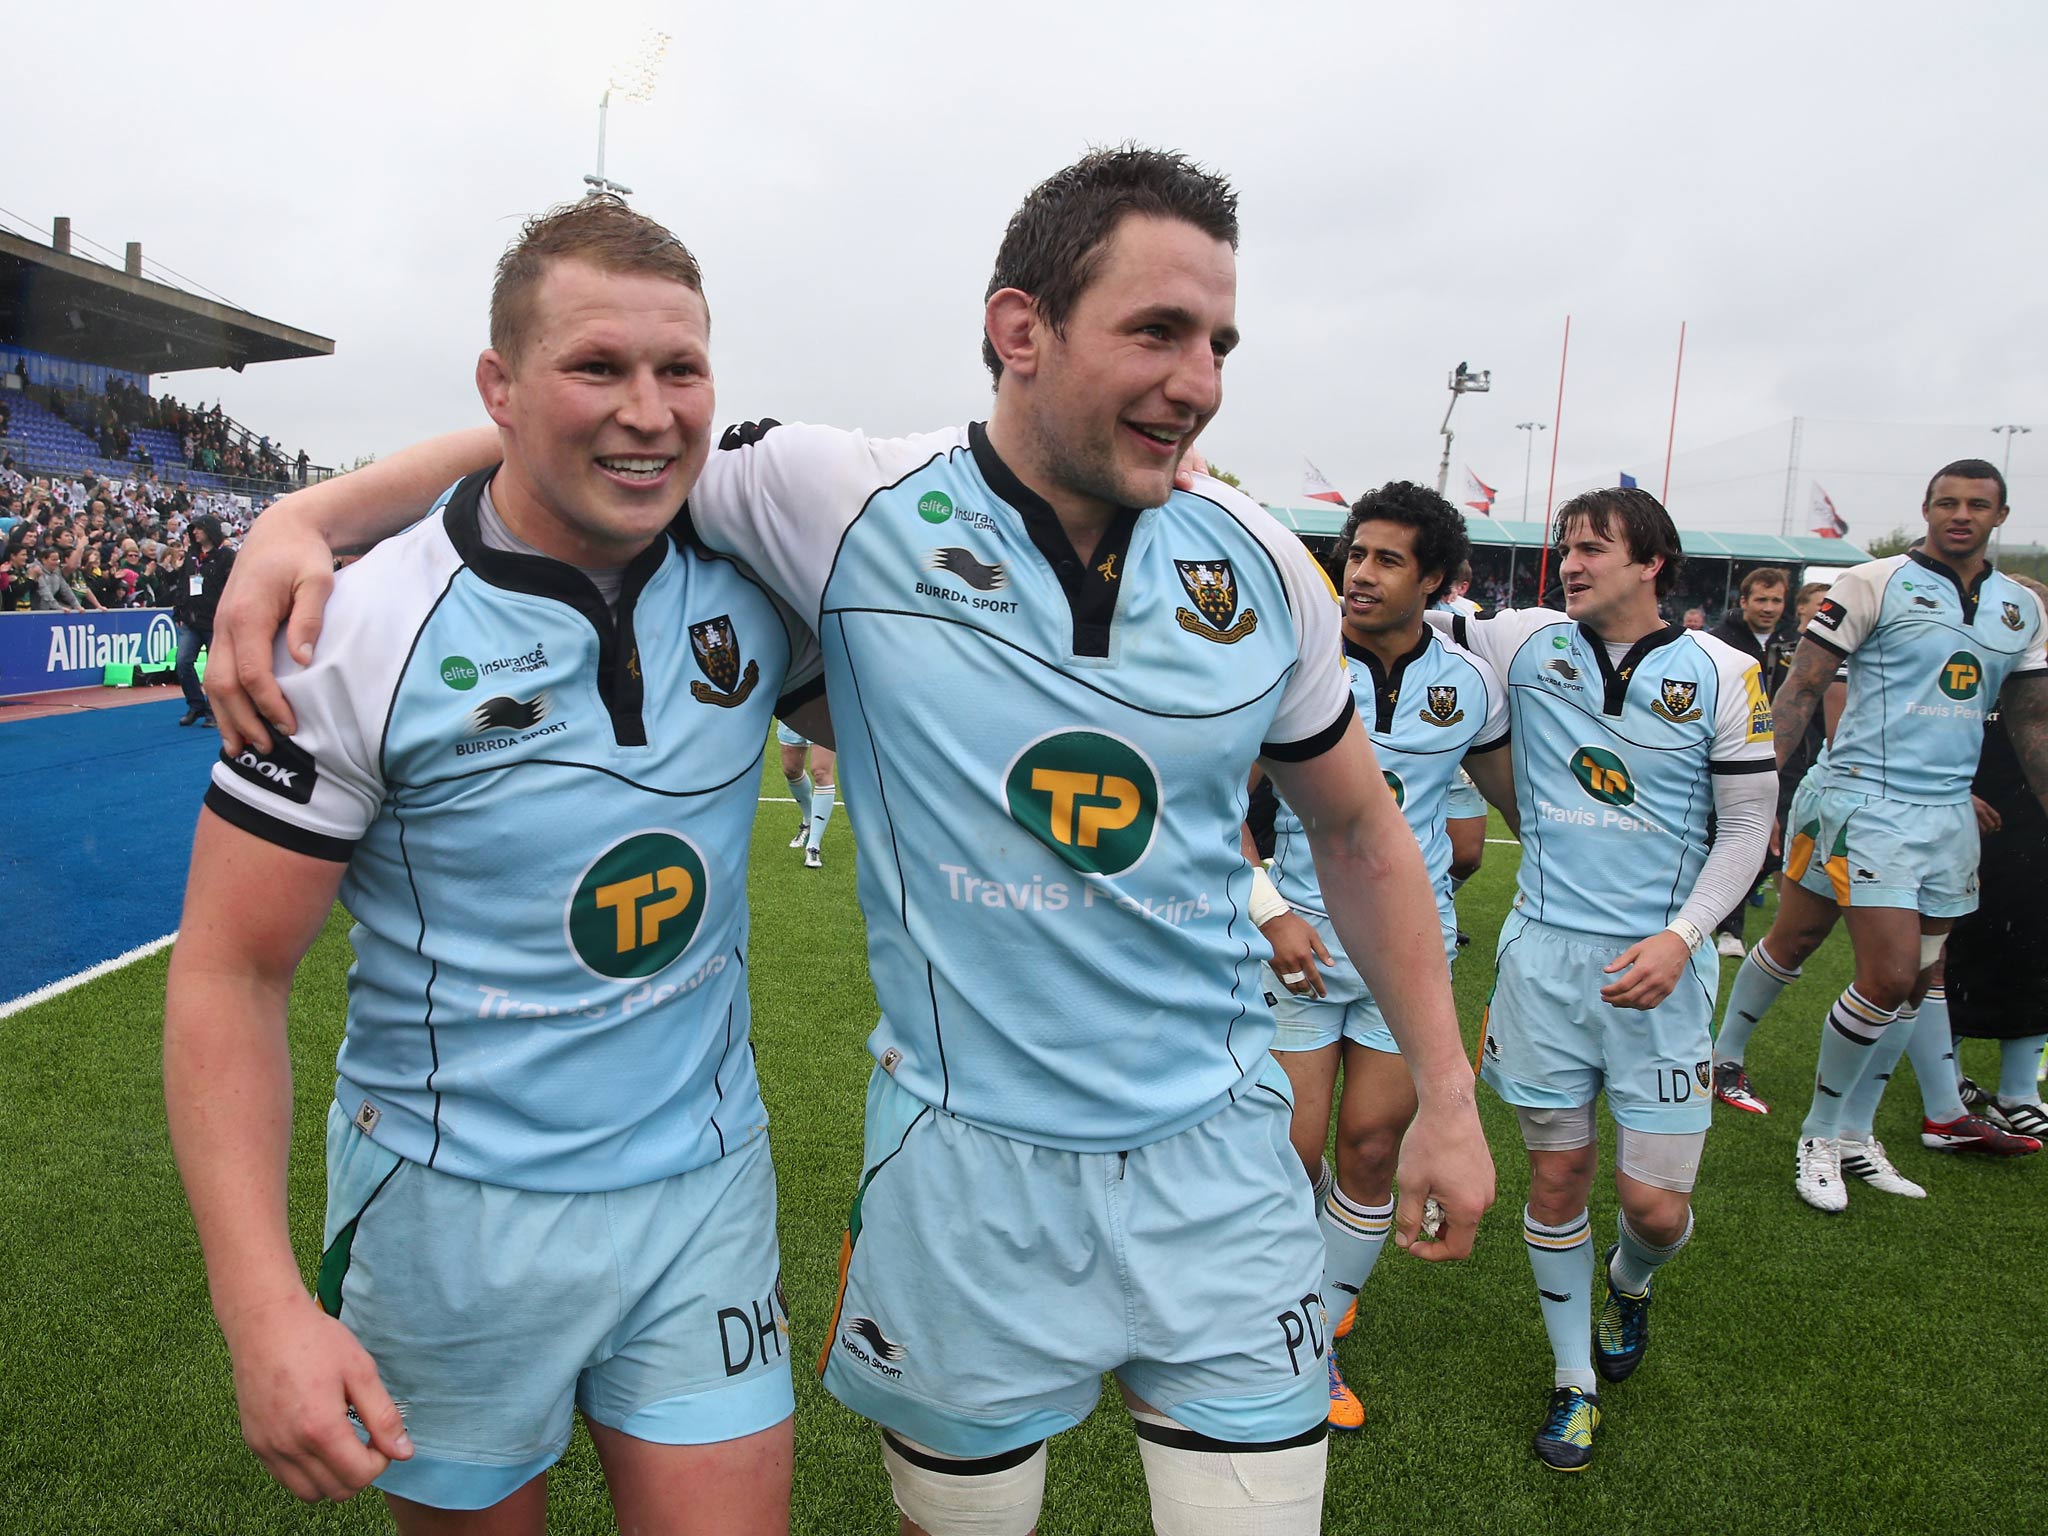 Northampton Saints captain Dylan Hartley celebrates with teammate Phil Dowson after their semi-final success